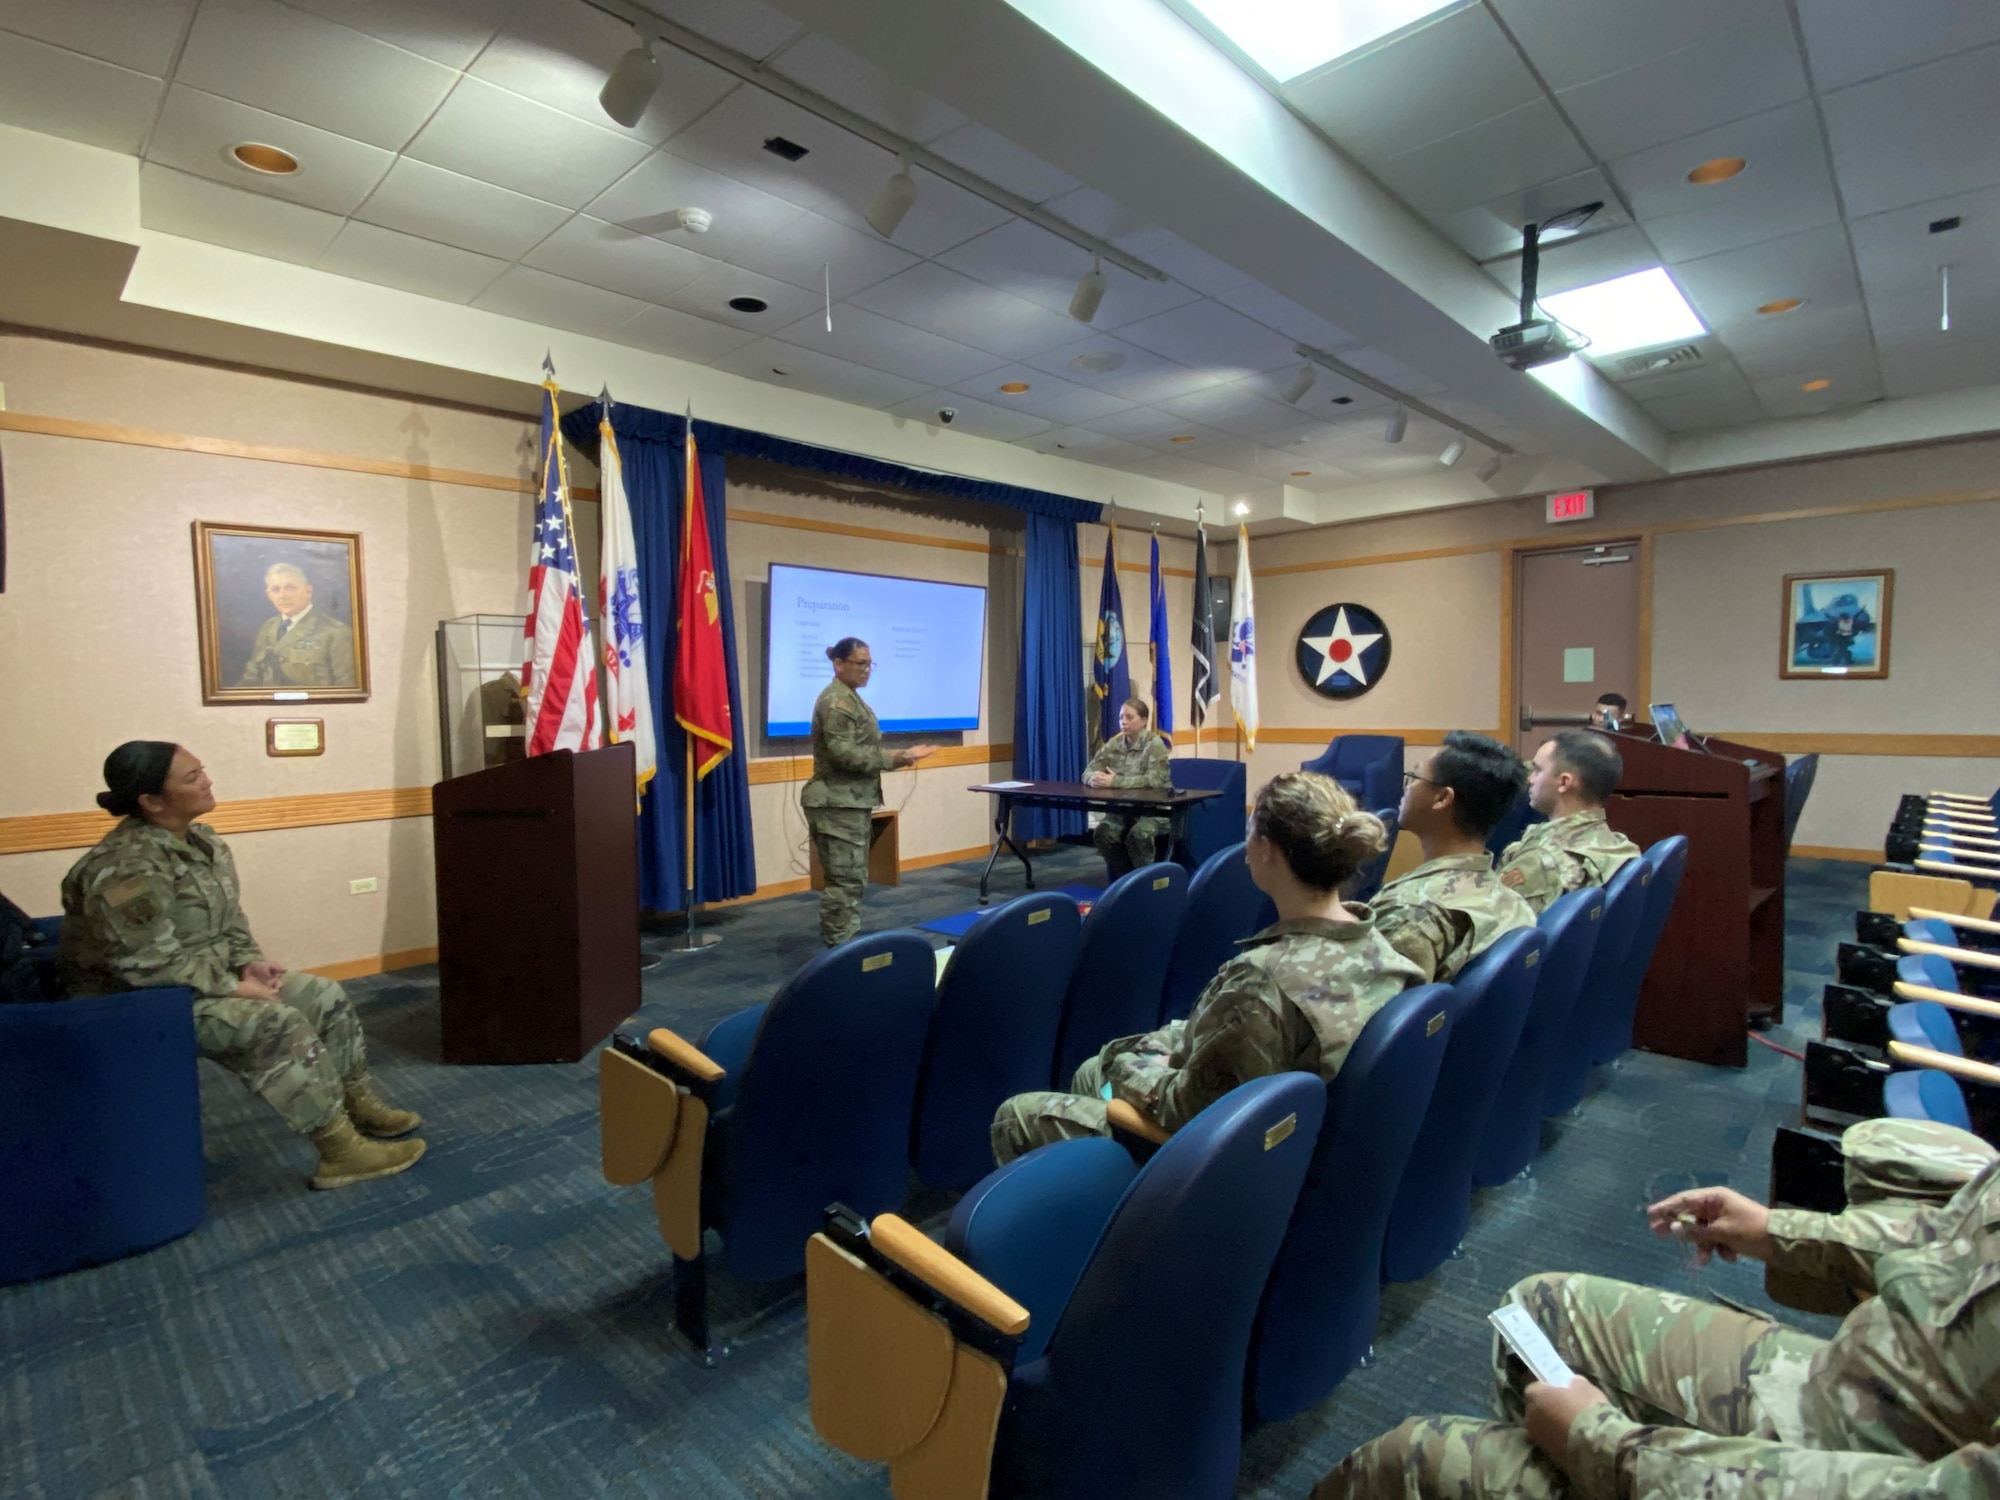 Senior enlisted Airmen stand at front of auditorium addressing audience of junior enlisted Airmen.